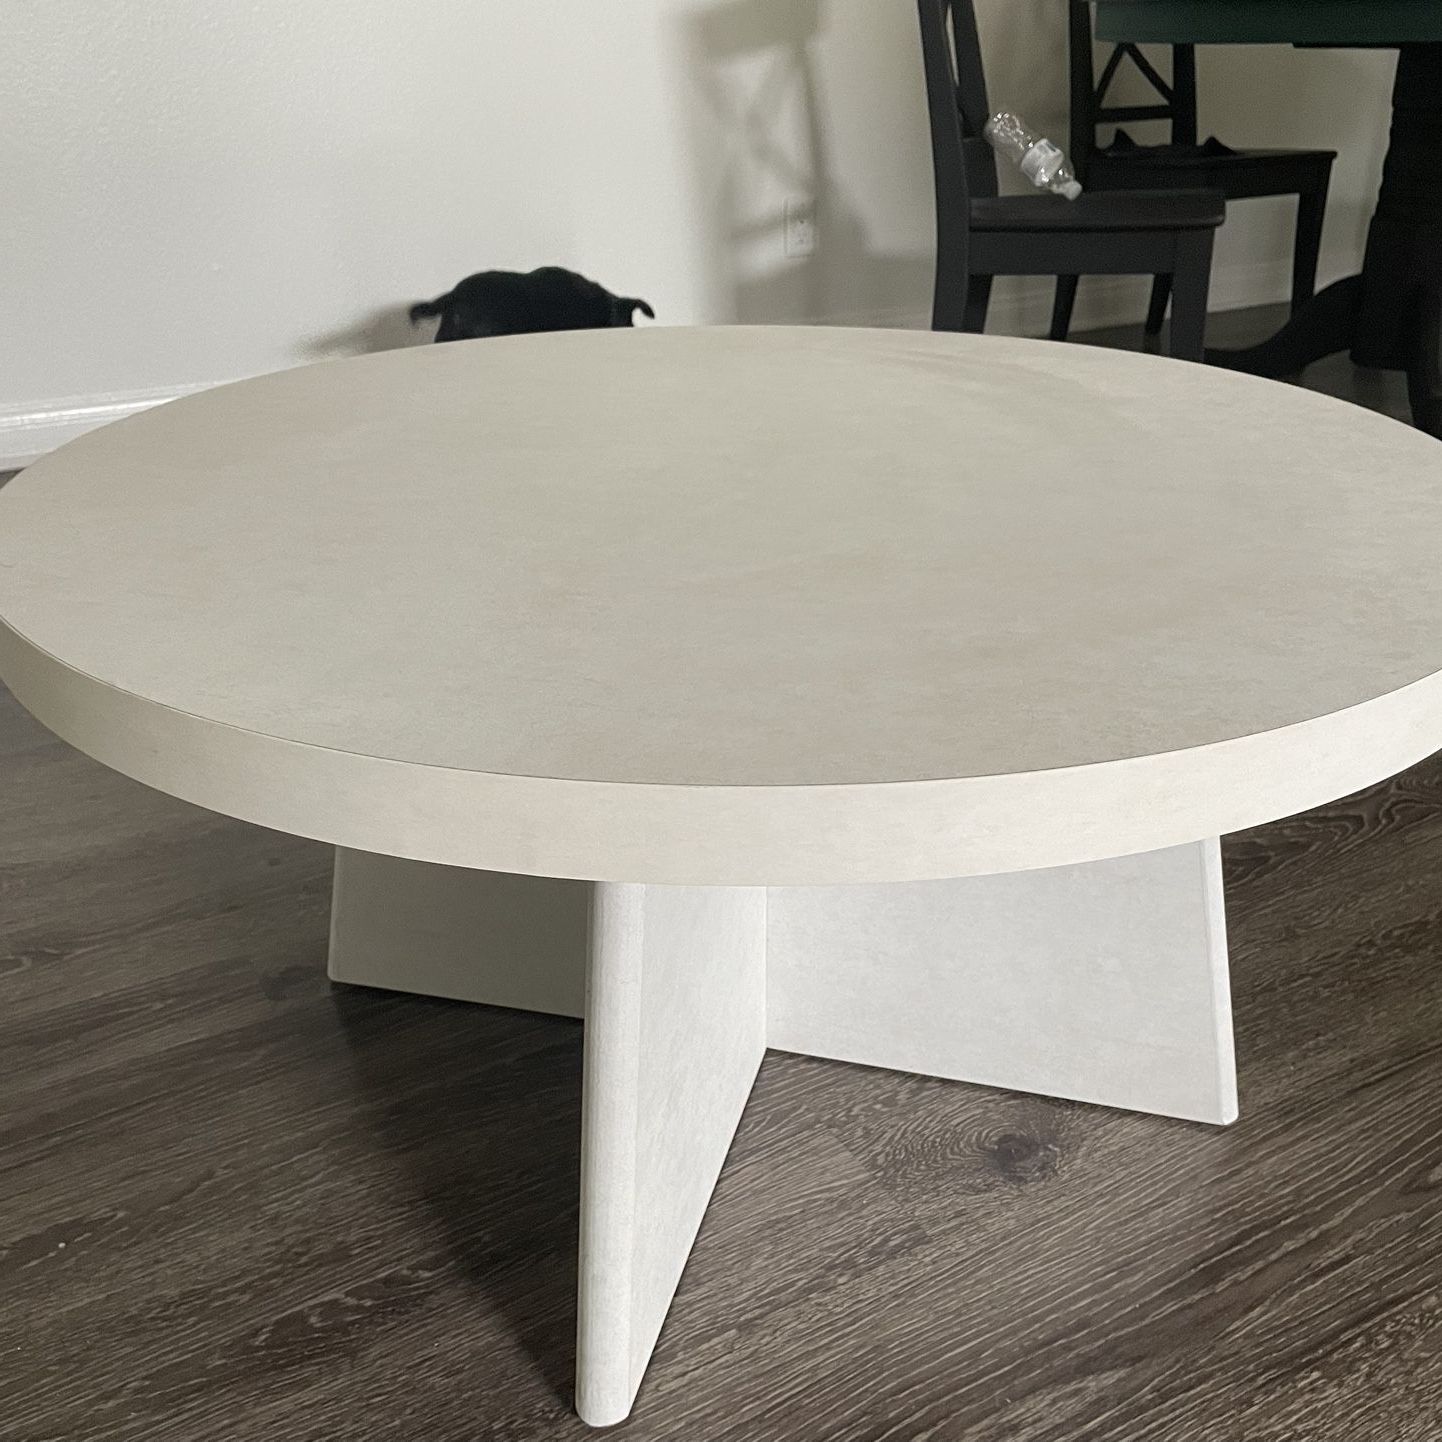 Latest Queer Eye Liam Round Coffee Table For Sale In Huntington Beach, Ca – Offerup Throughout Liam Round Plaster Coffee Tables (Photo 9 of 10)